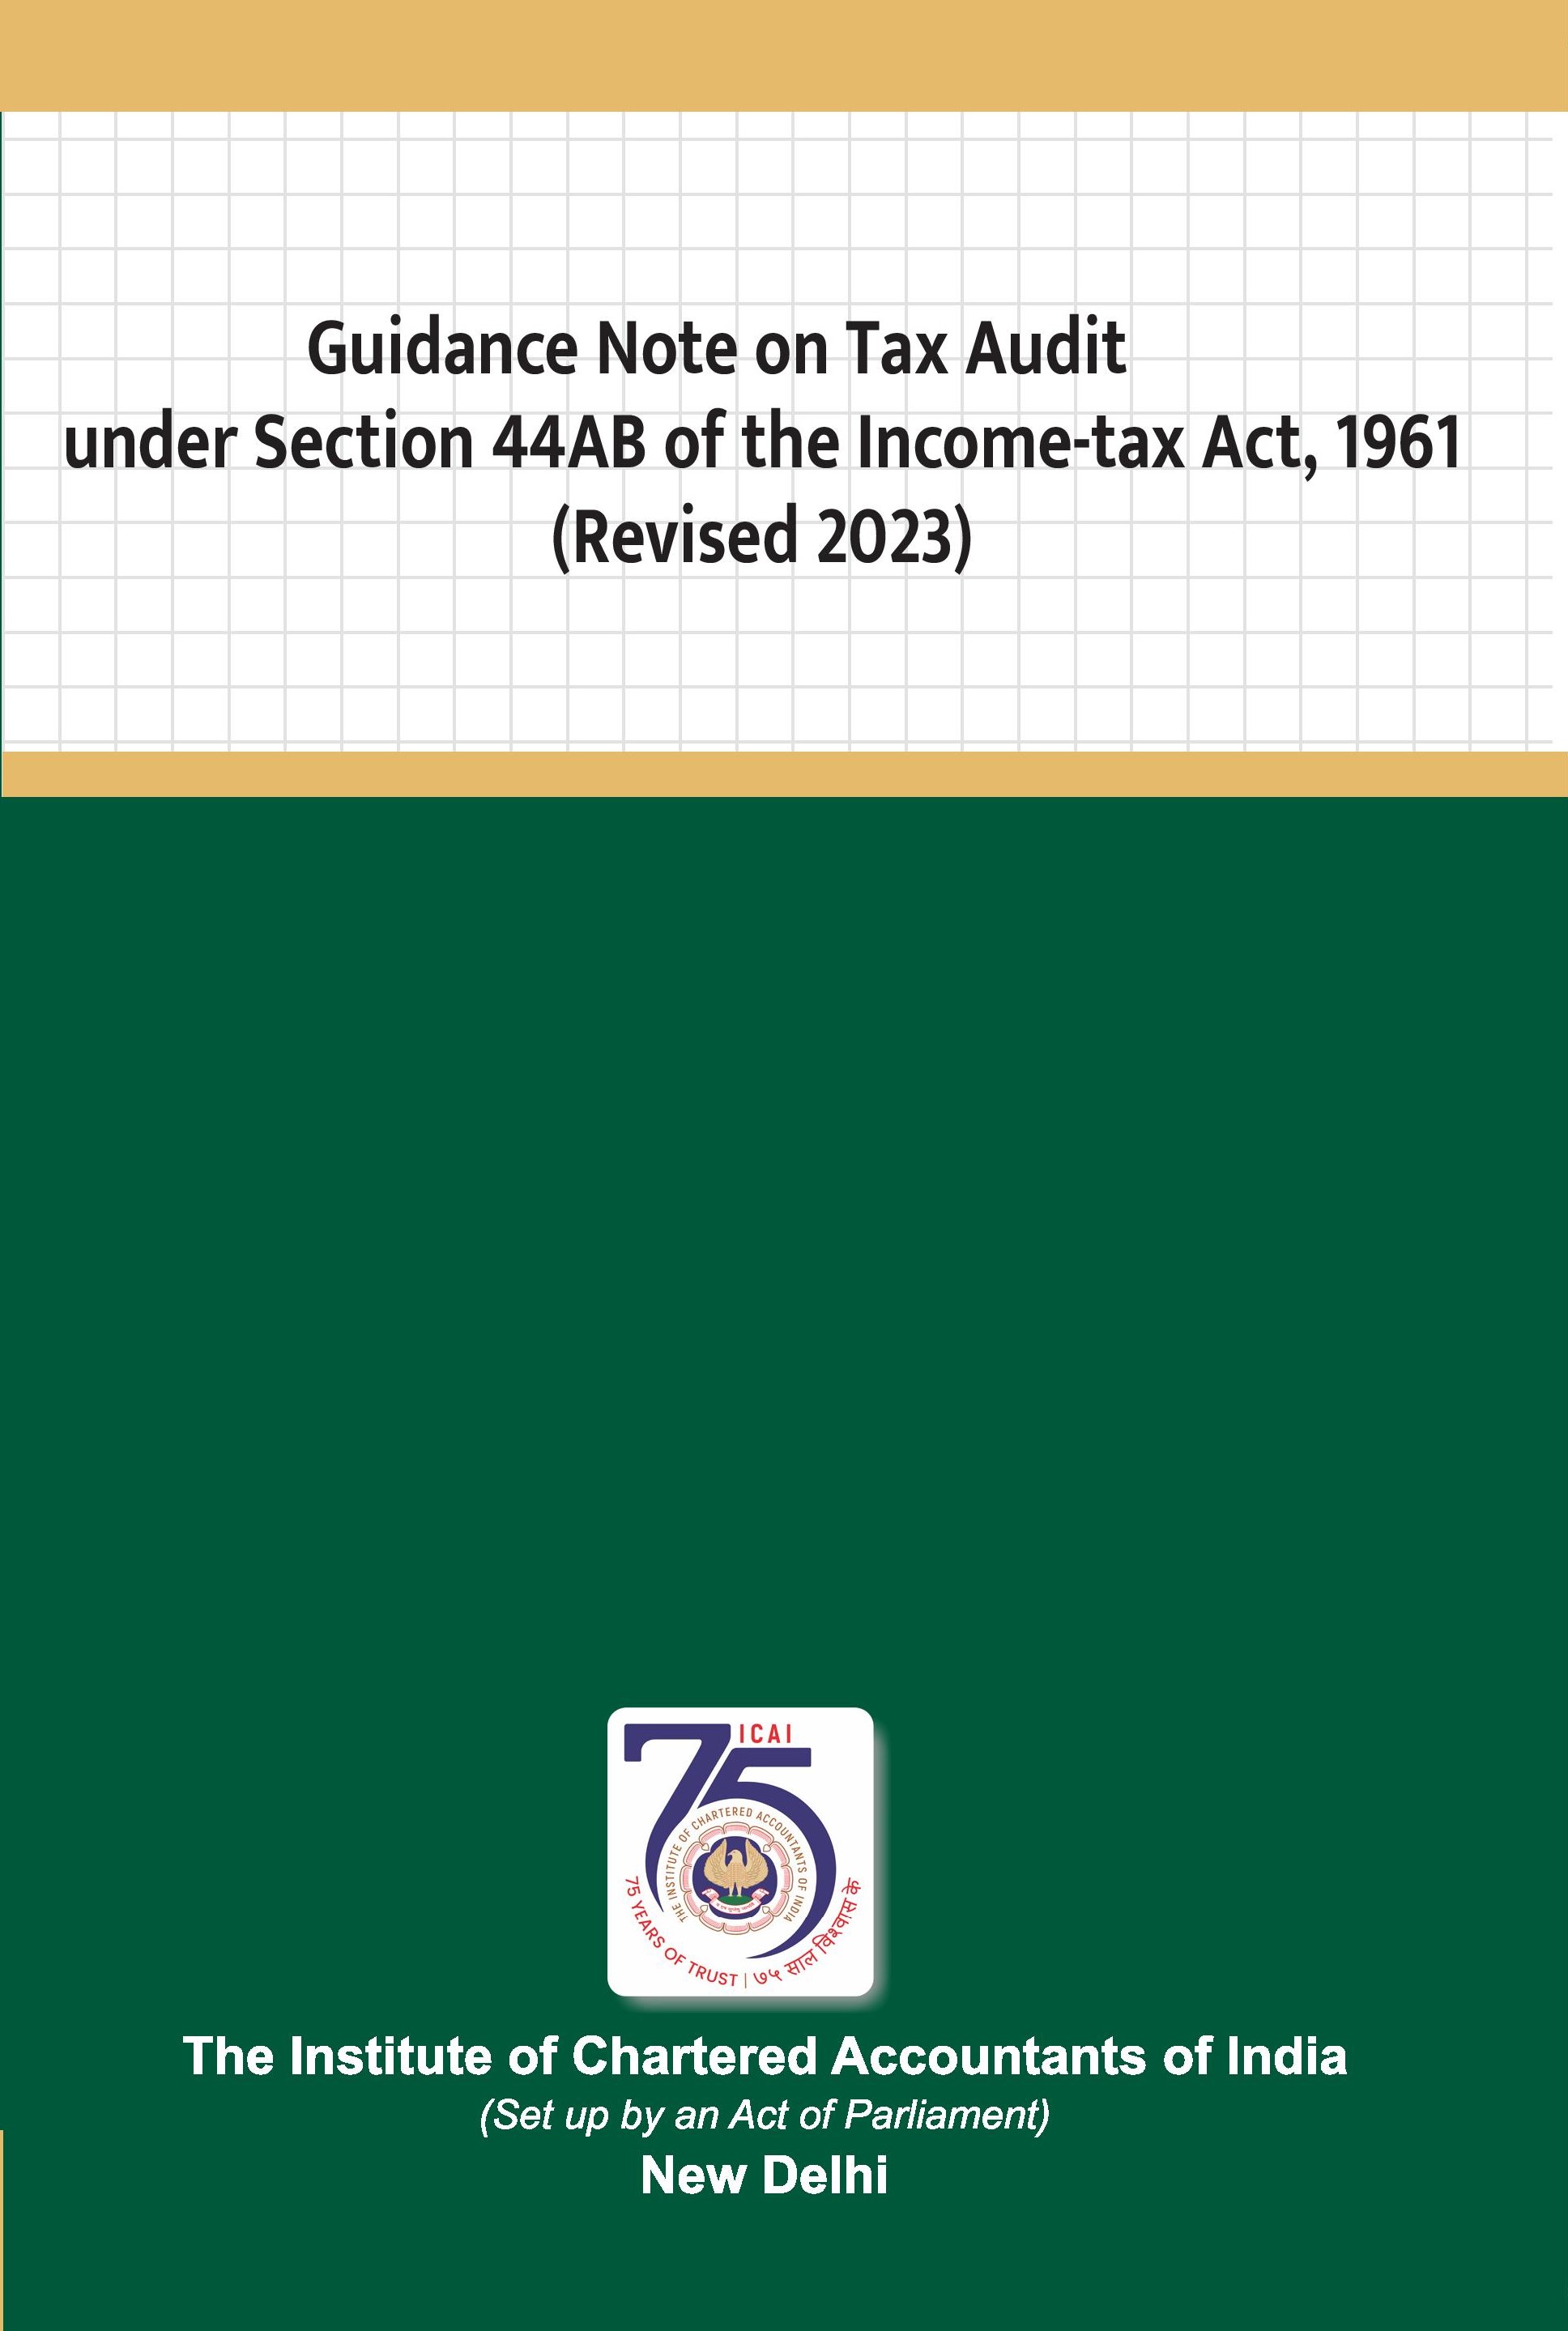 Guidance Note on Tax Audit Under Section 44AB of the Income-Tax Act, 1961 (Revised 2023)